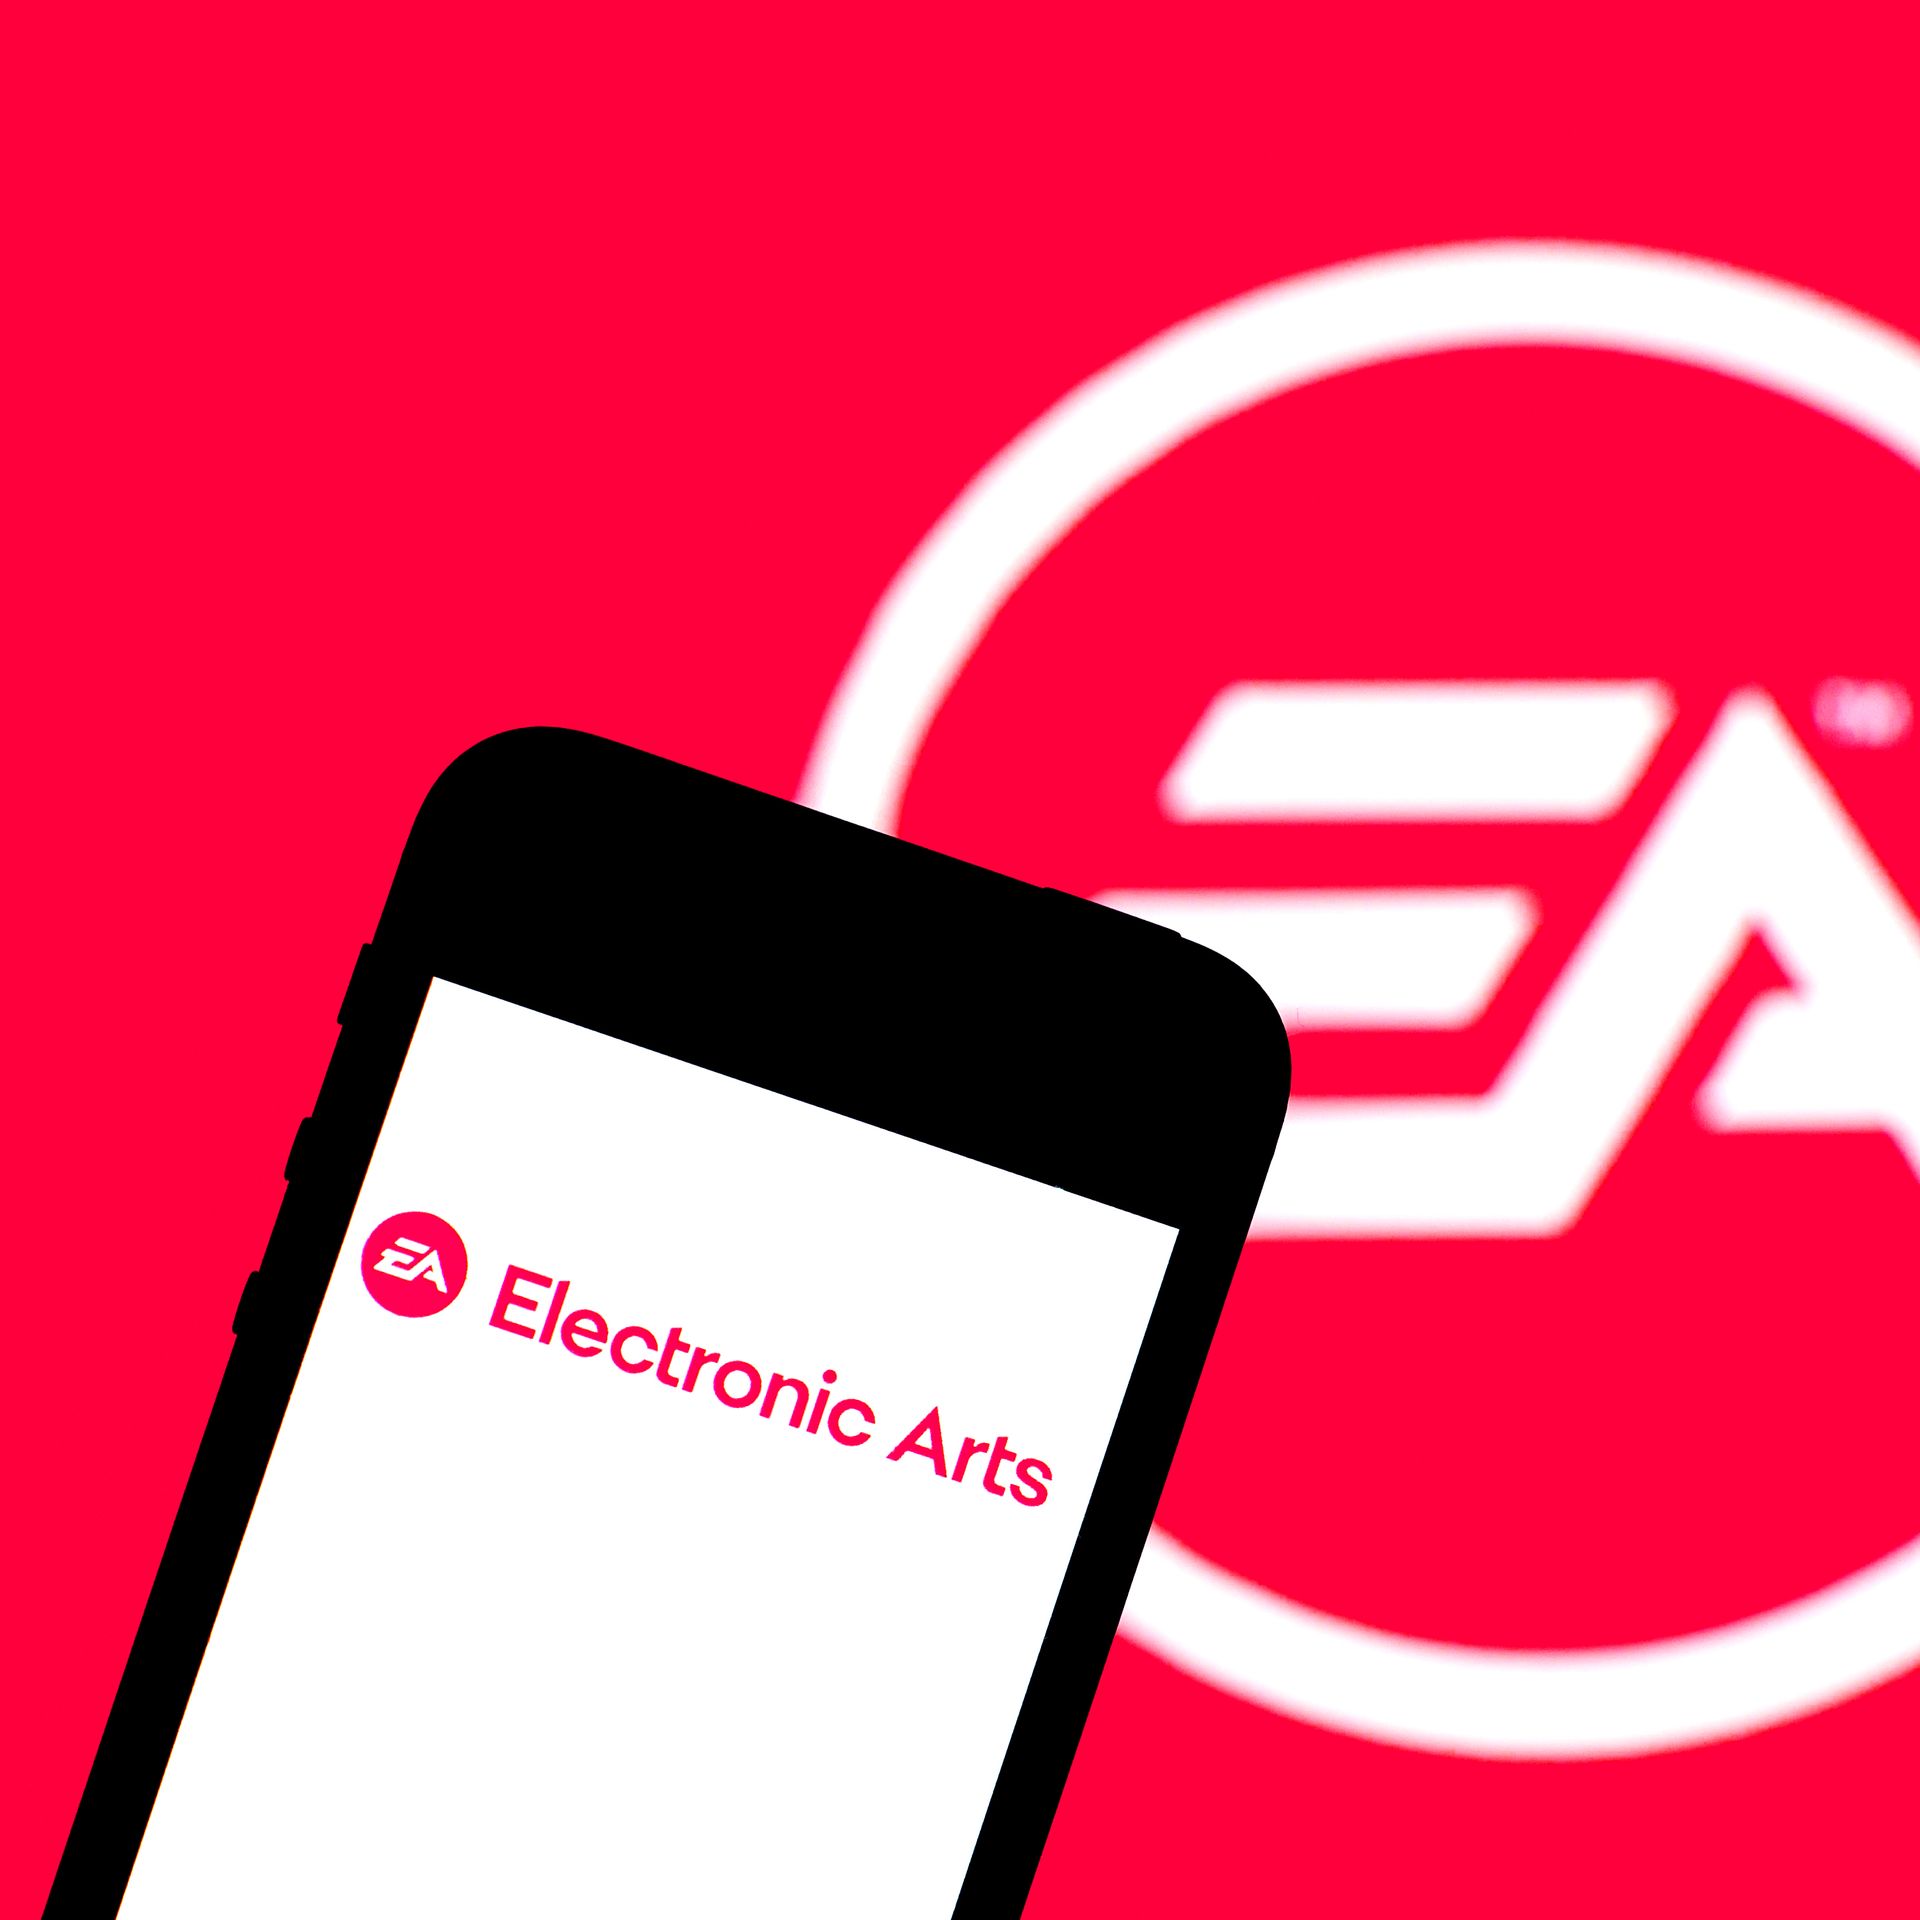 Photo of a cell phone and the logo for Electronic Arts